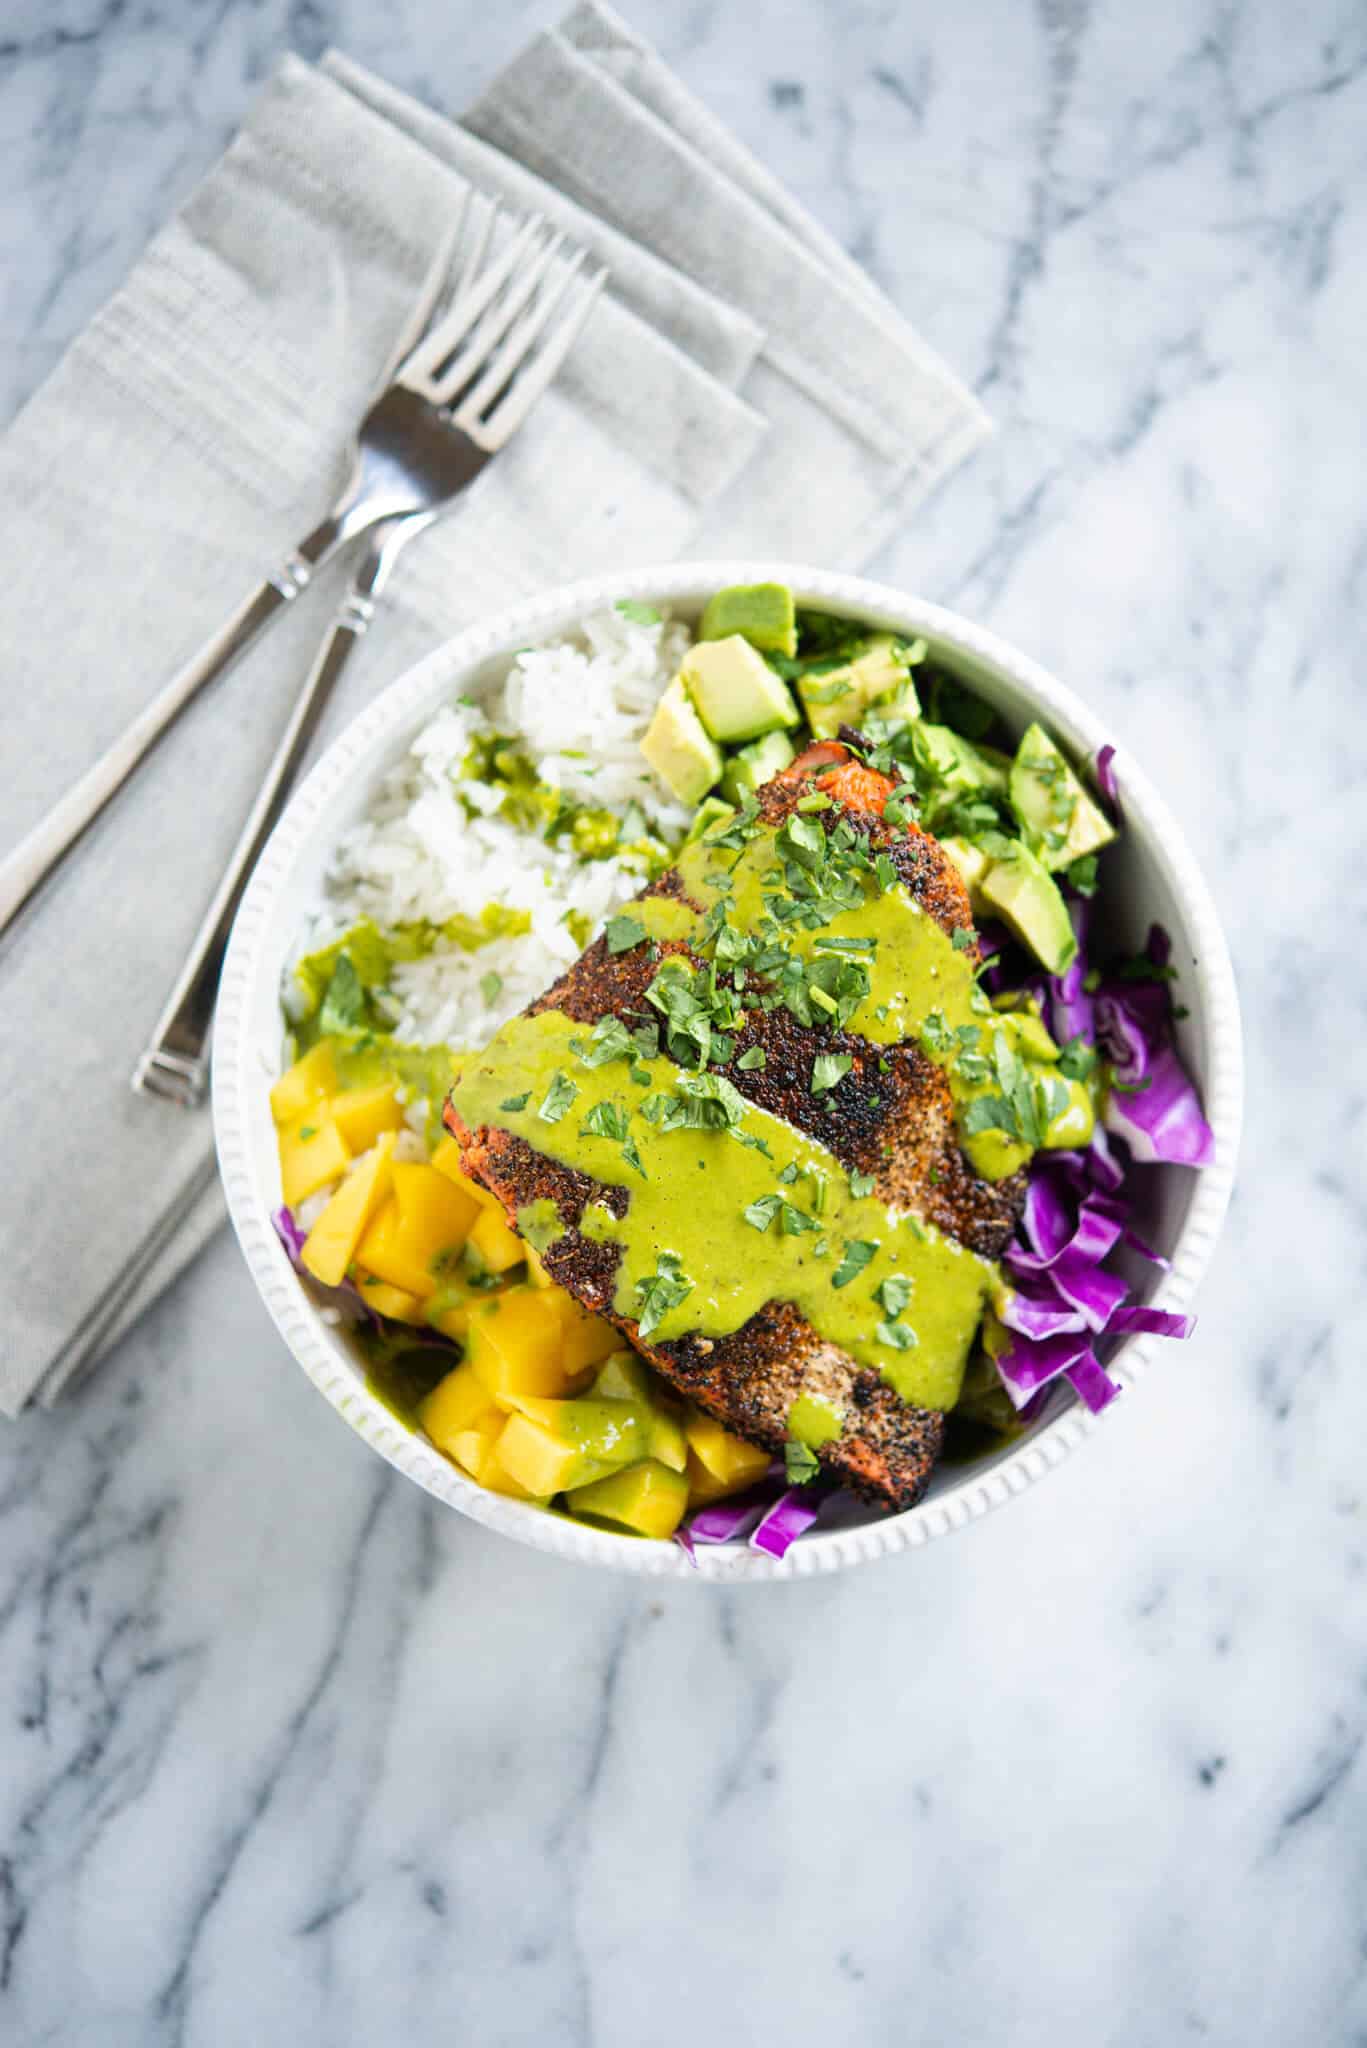 blackened salmon in a white bowl with rice, purple cabbage, mango, avocado and a green sauce sitting on a marble surface